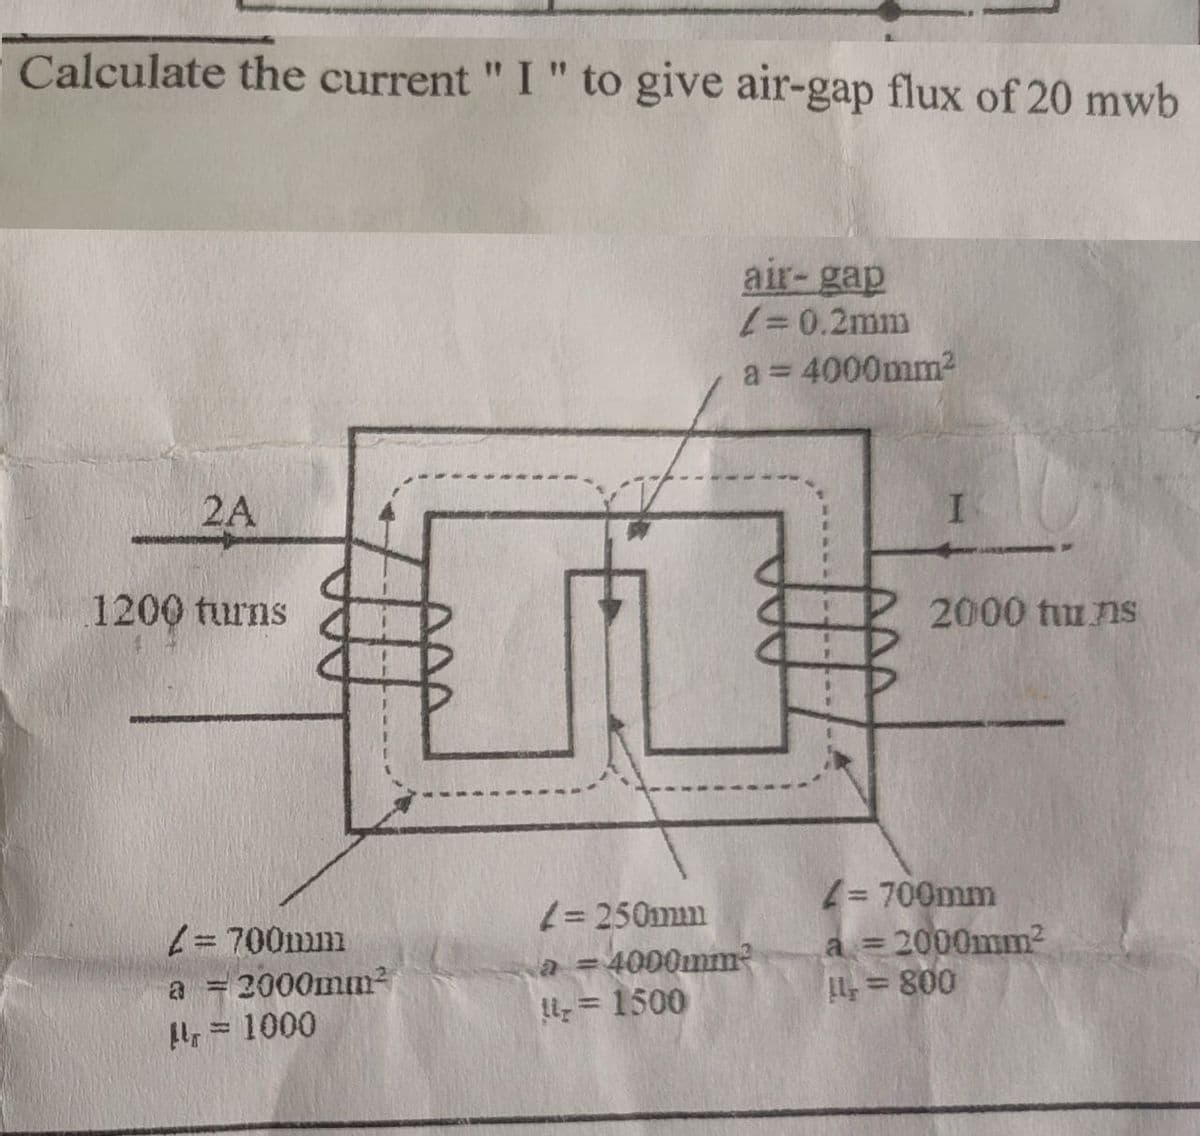 Calculate the current " I " to give air-gap flux of 20 mwb
air-gap
/= 0.2mm
a = 4000mm²
2A
I
1200 turns
2000 tuns
/=700mm
a = 2000mm²
Mr = 1000
4= 250mm
a = 4000mm²
1 = 1500
4= 700mm
a = 2000mm²
14 = 800